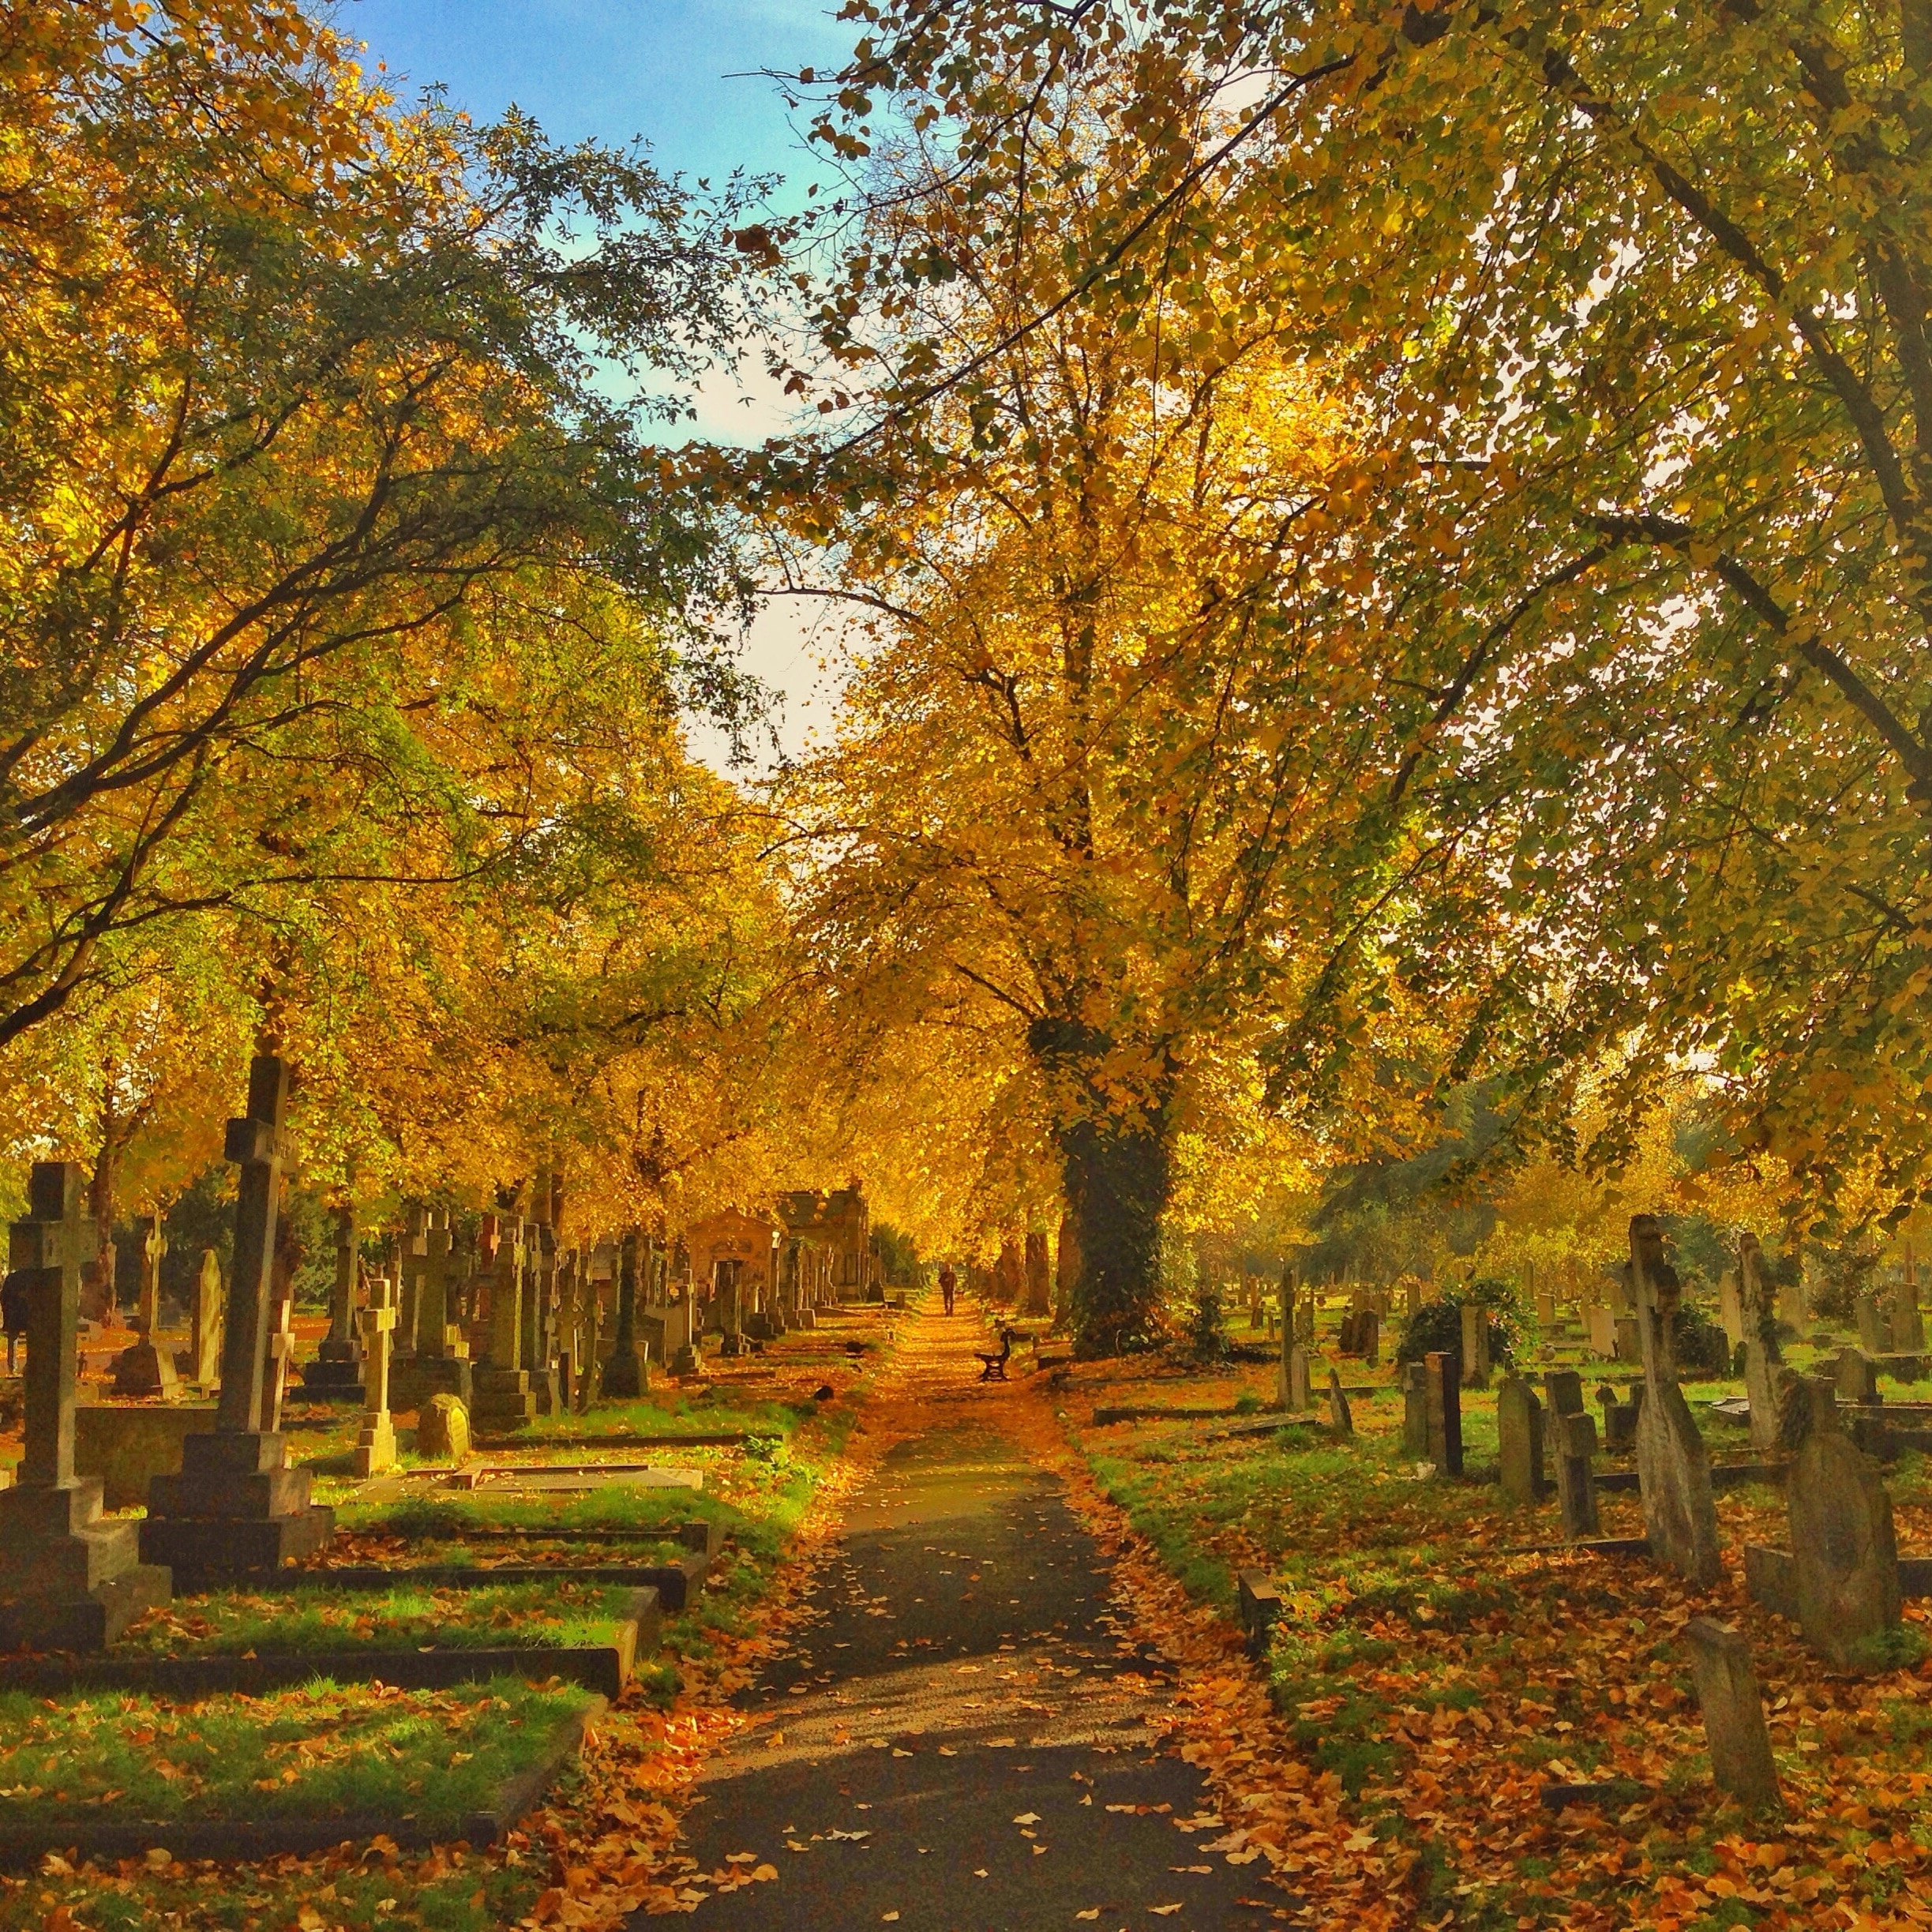 Park's in London always look beautiful in fall. The gothic architecture of Brompton cemetery has an especially striking look.